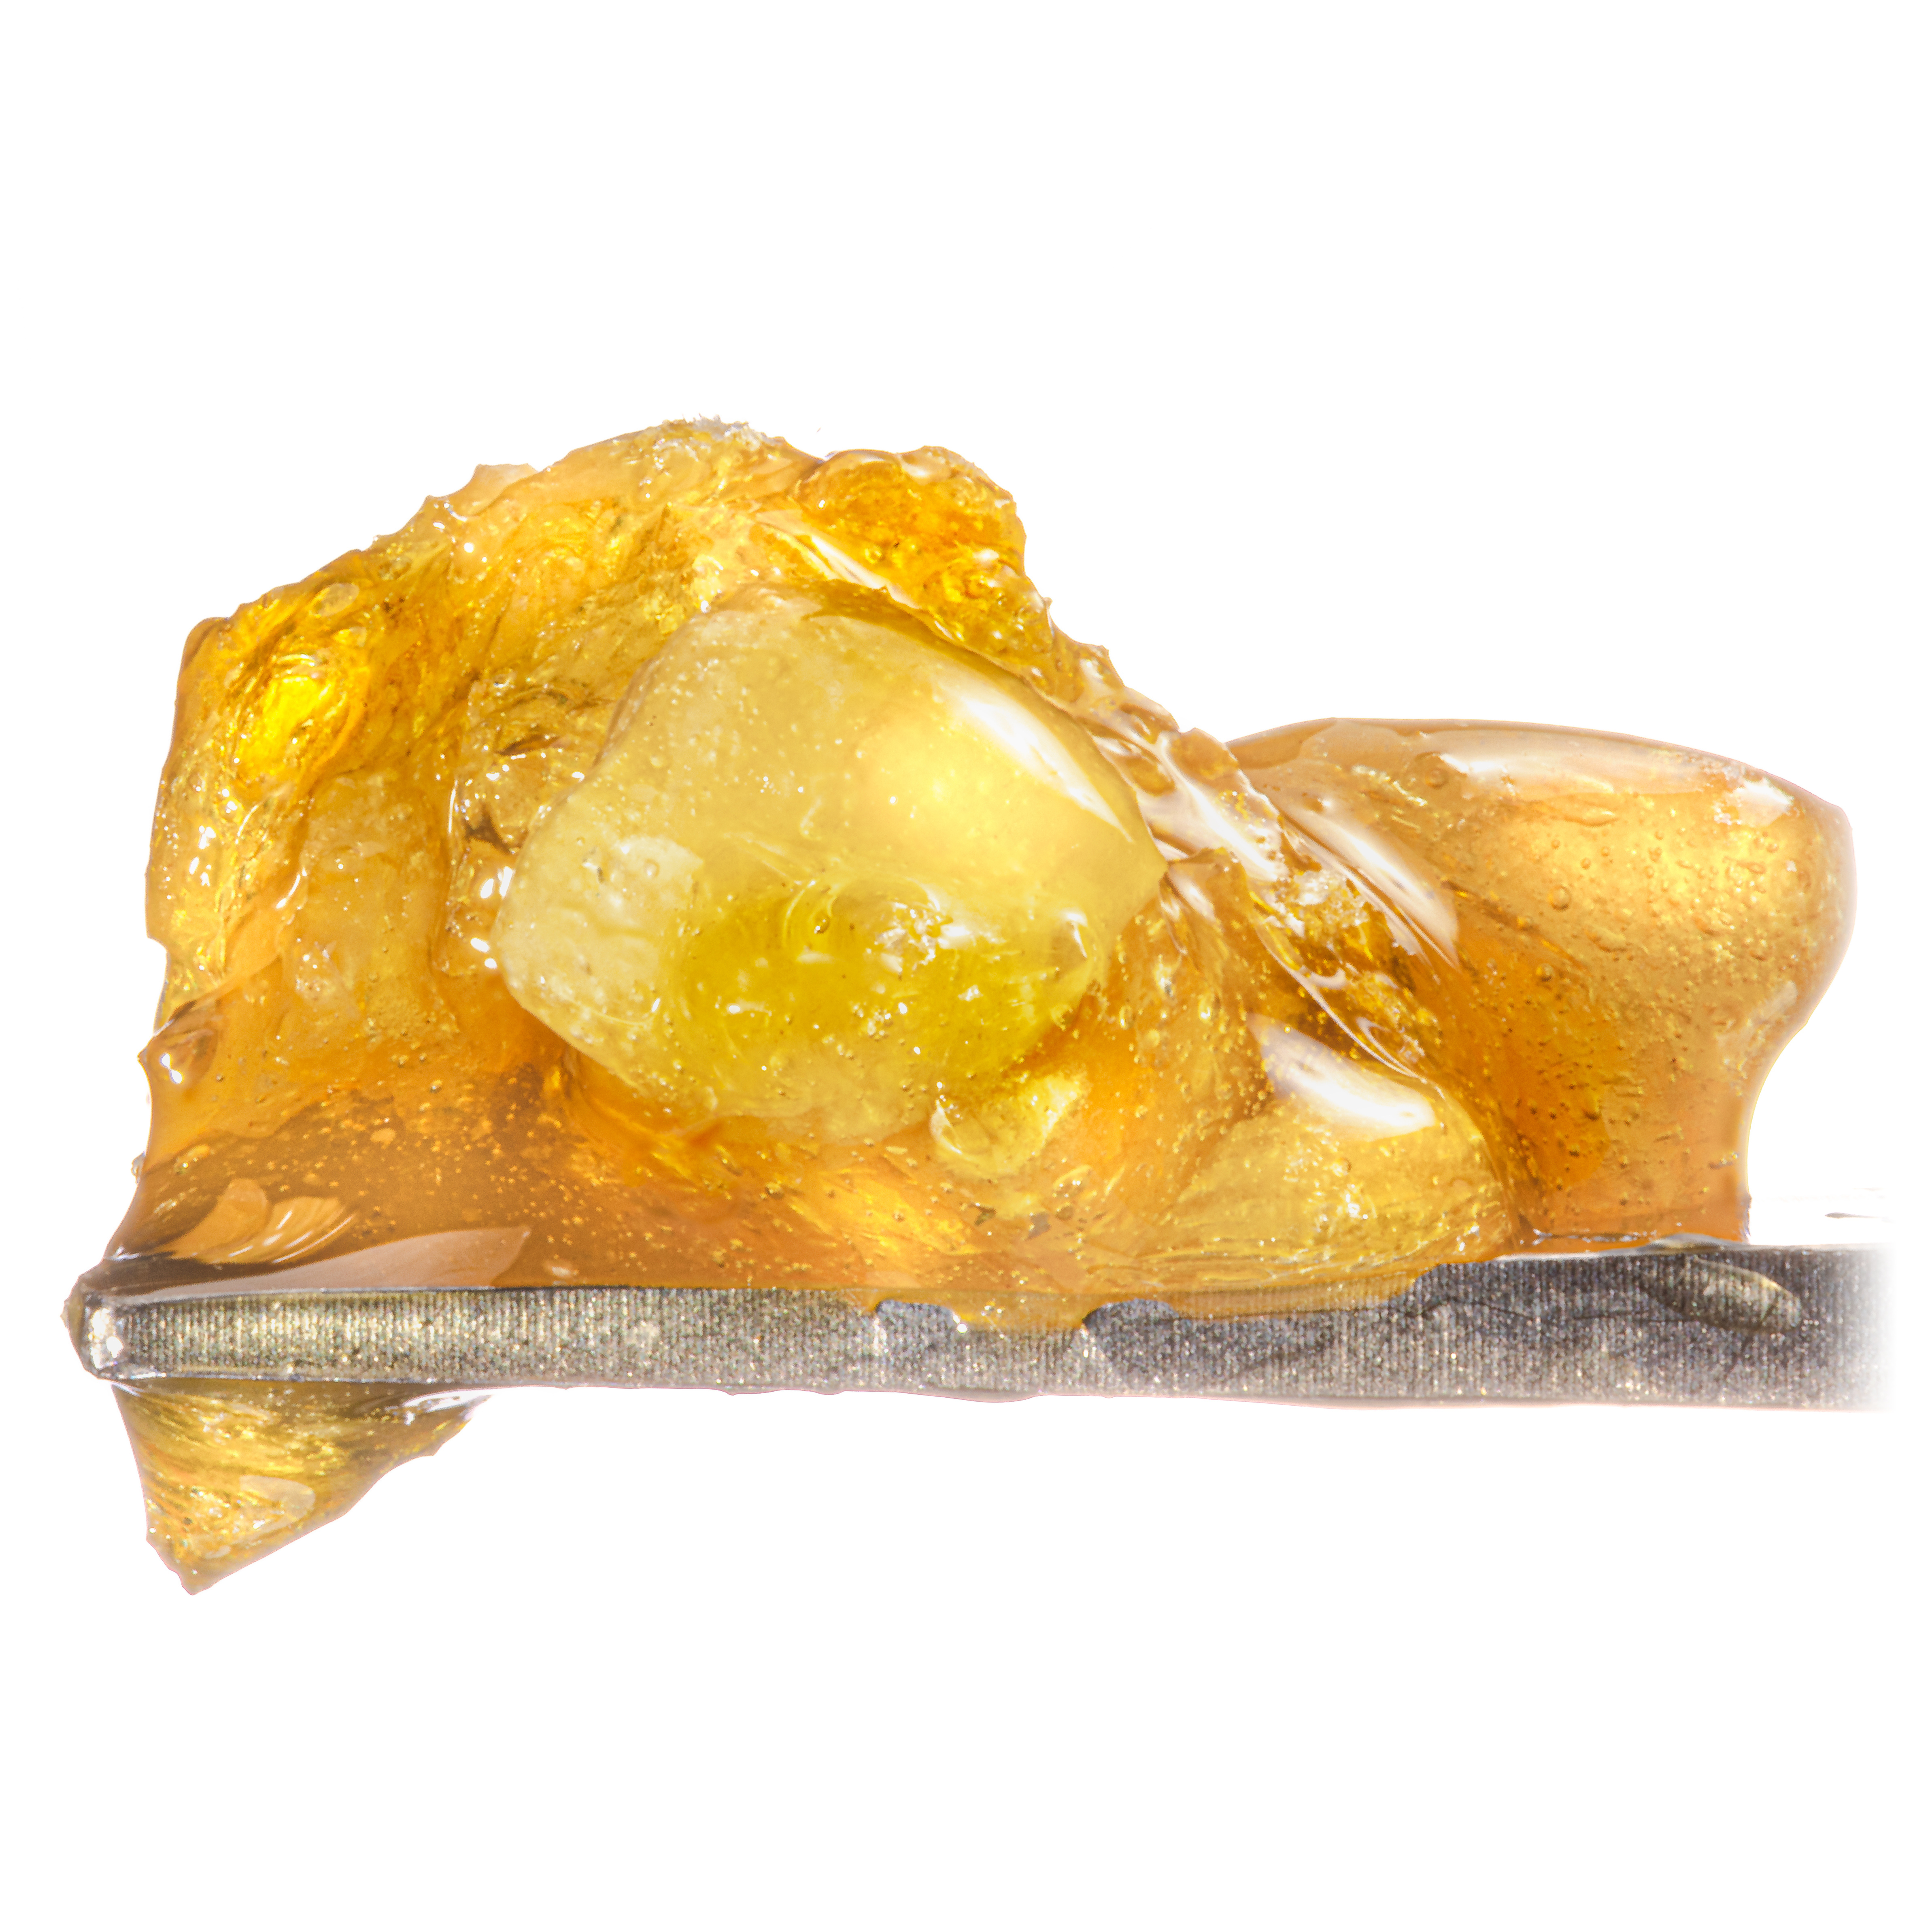 West Coast Cure Rosin for Sale